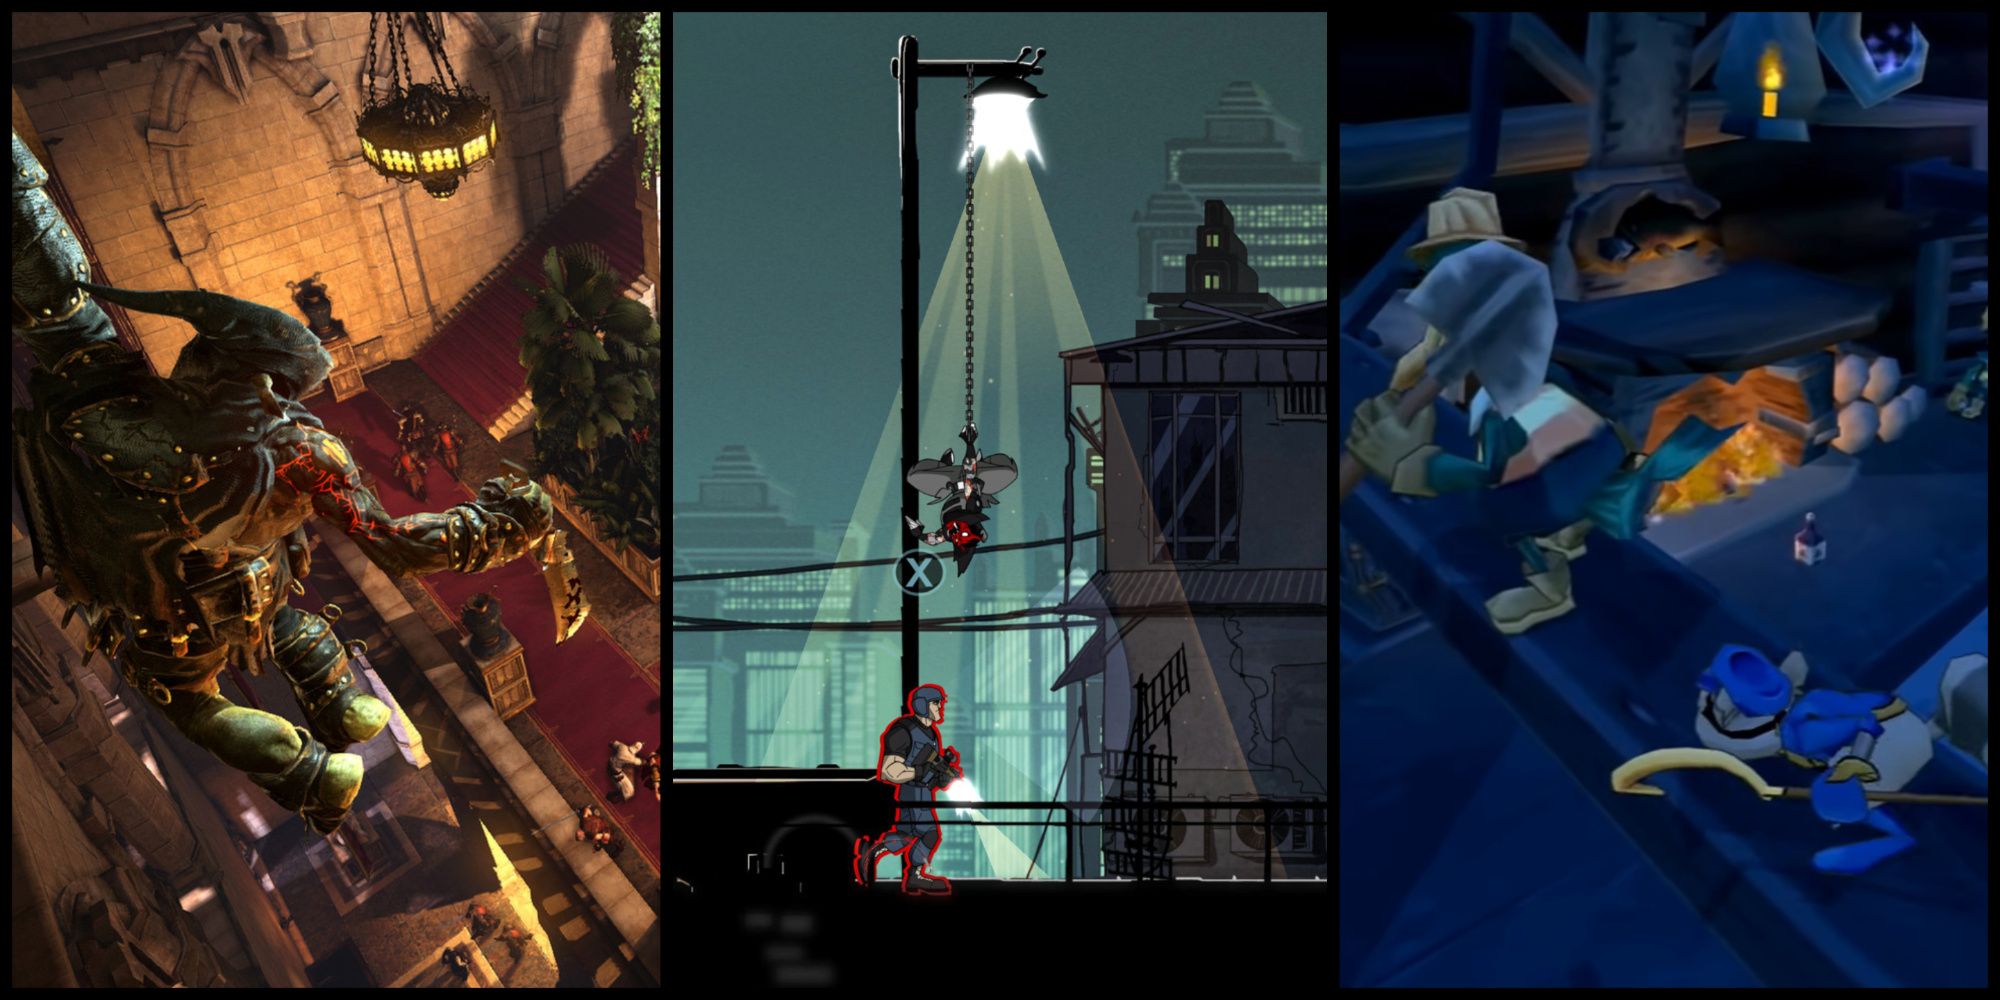 Screenshots from Styx: Master of Shadows, Mark of the Ninja, and Sly 2: Band of Thieves